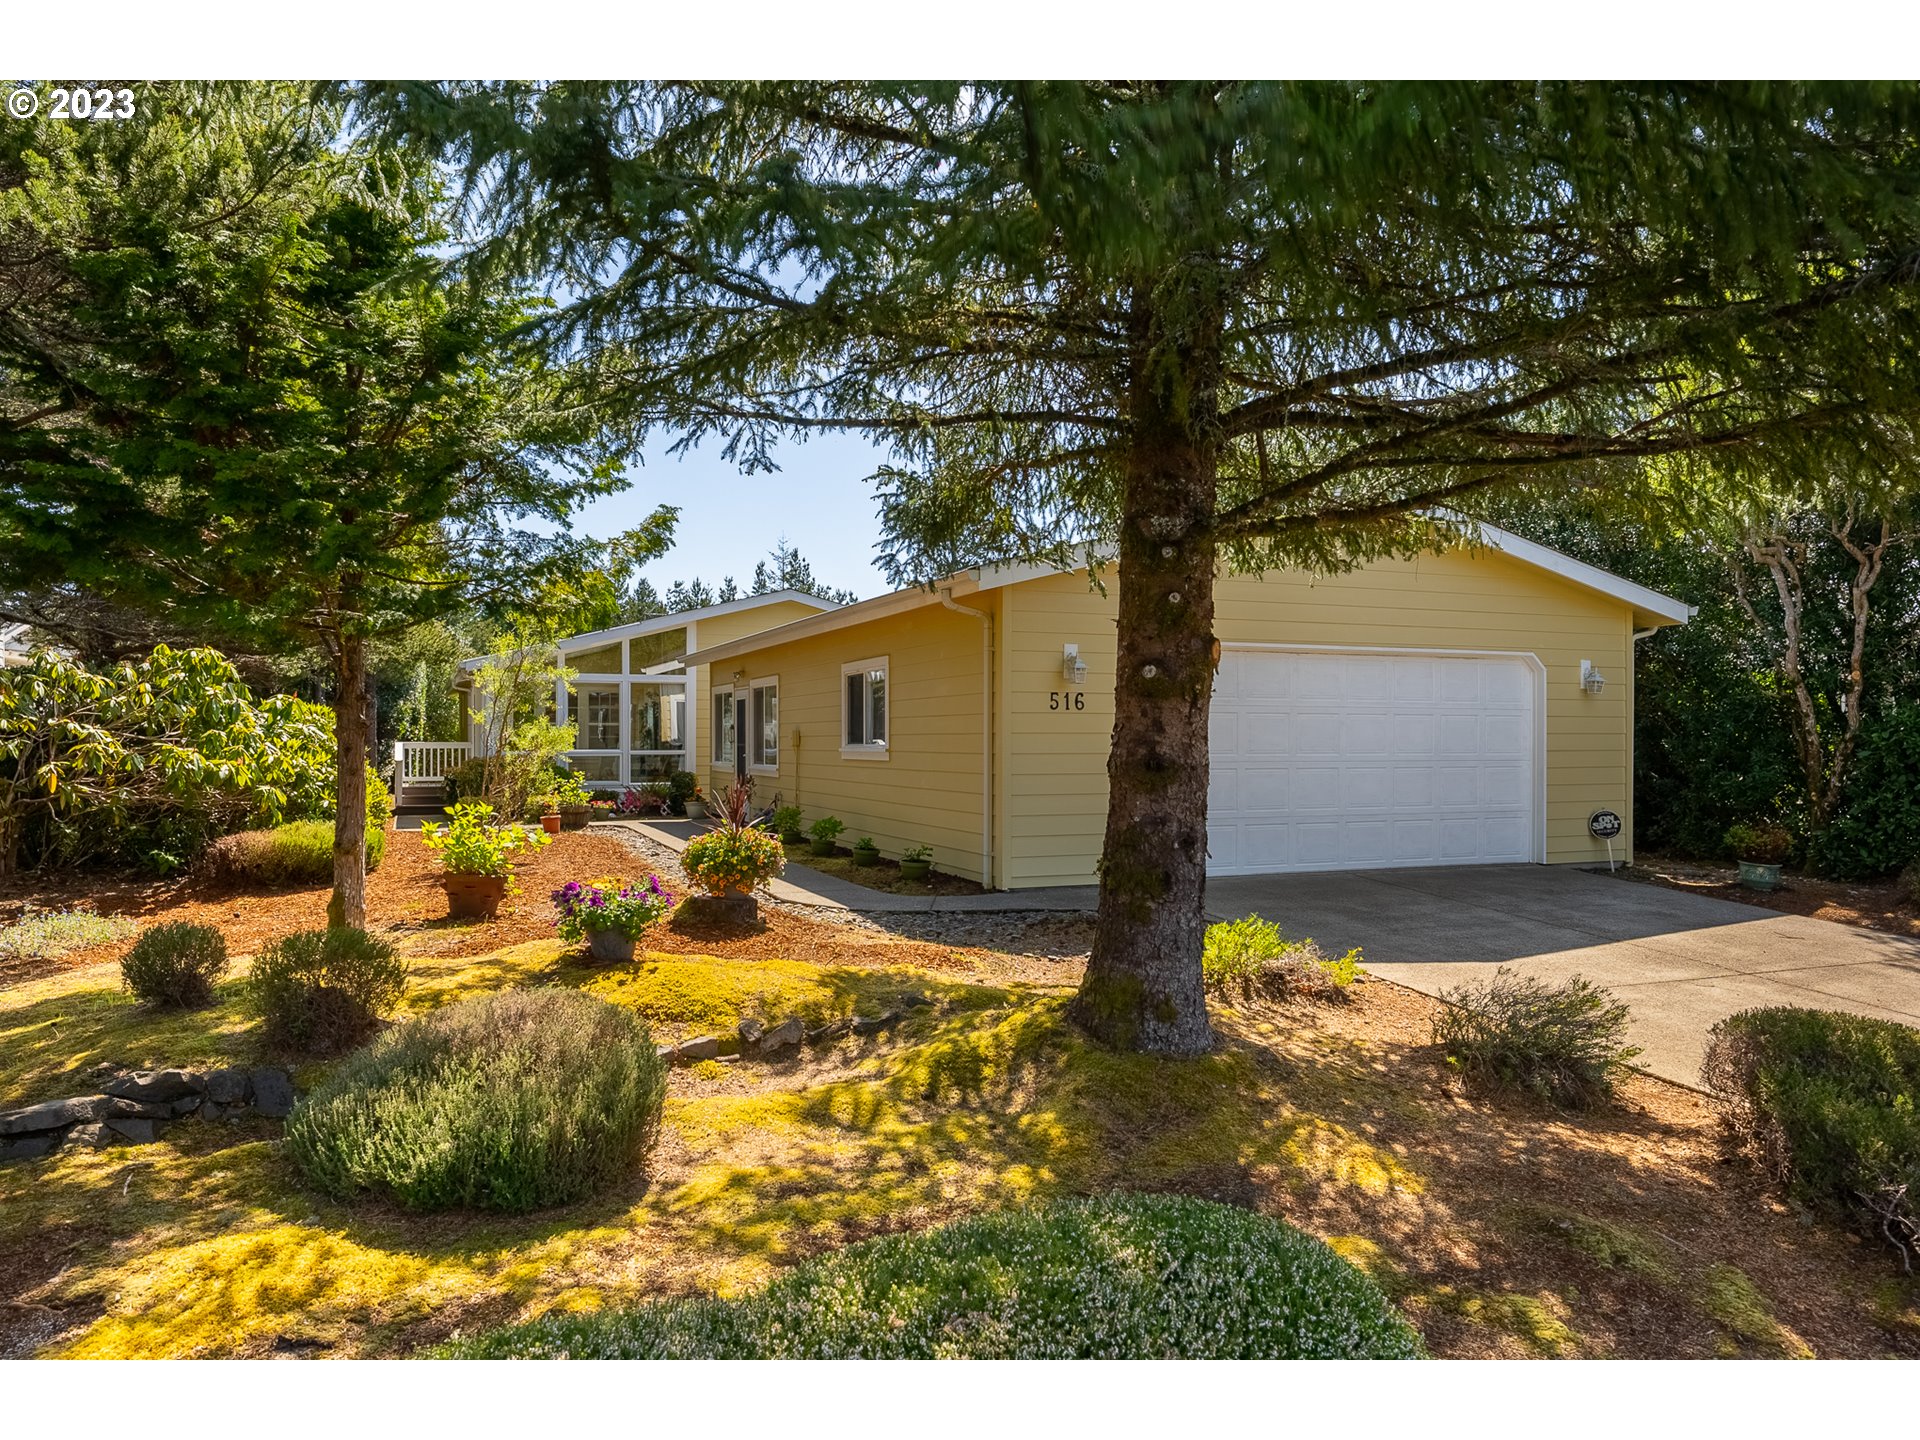 516 ROBIN LN, Florence, OR 97439